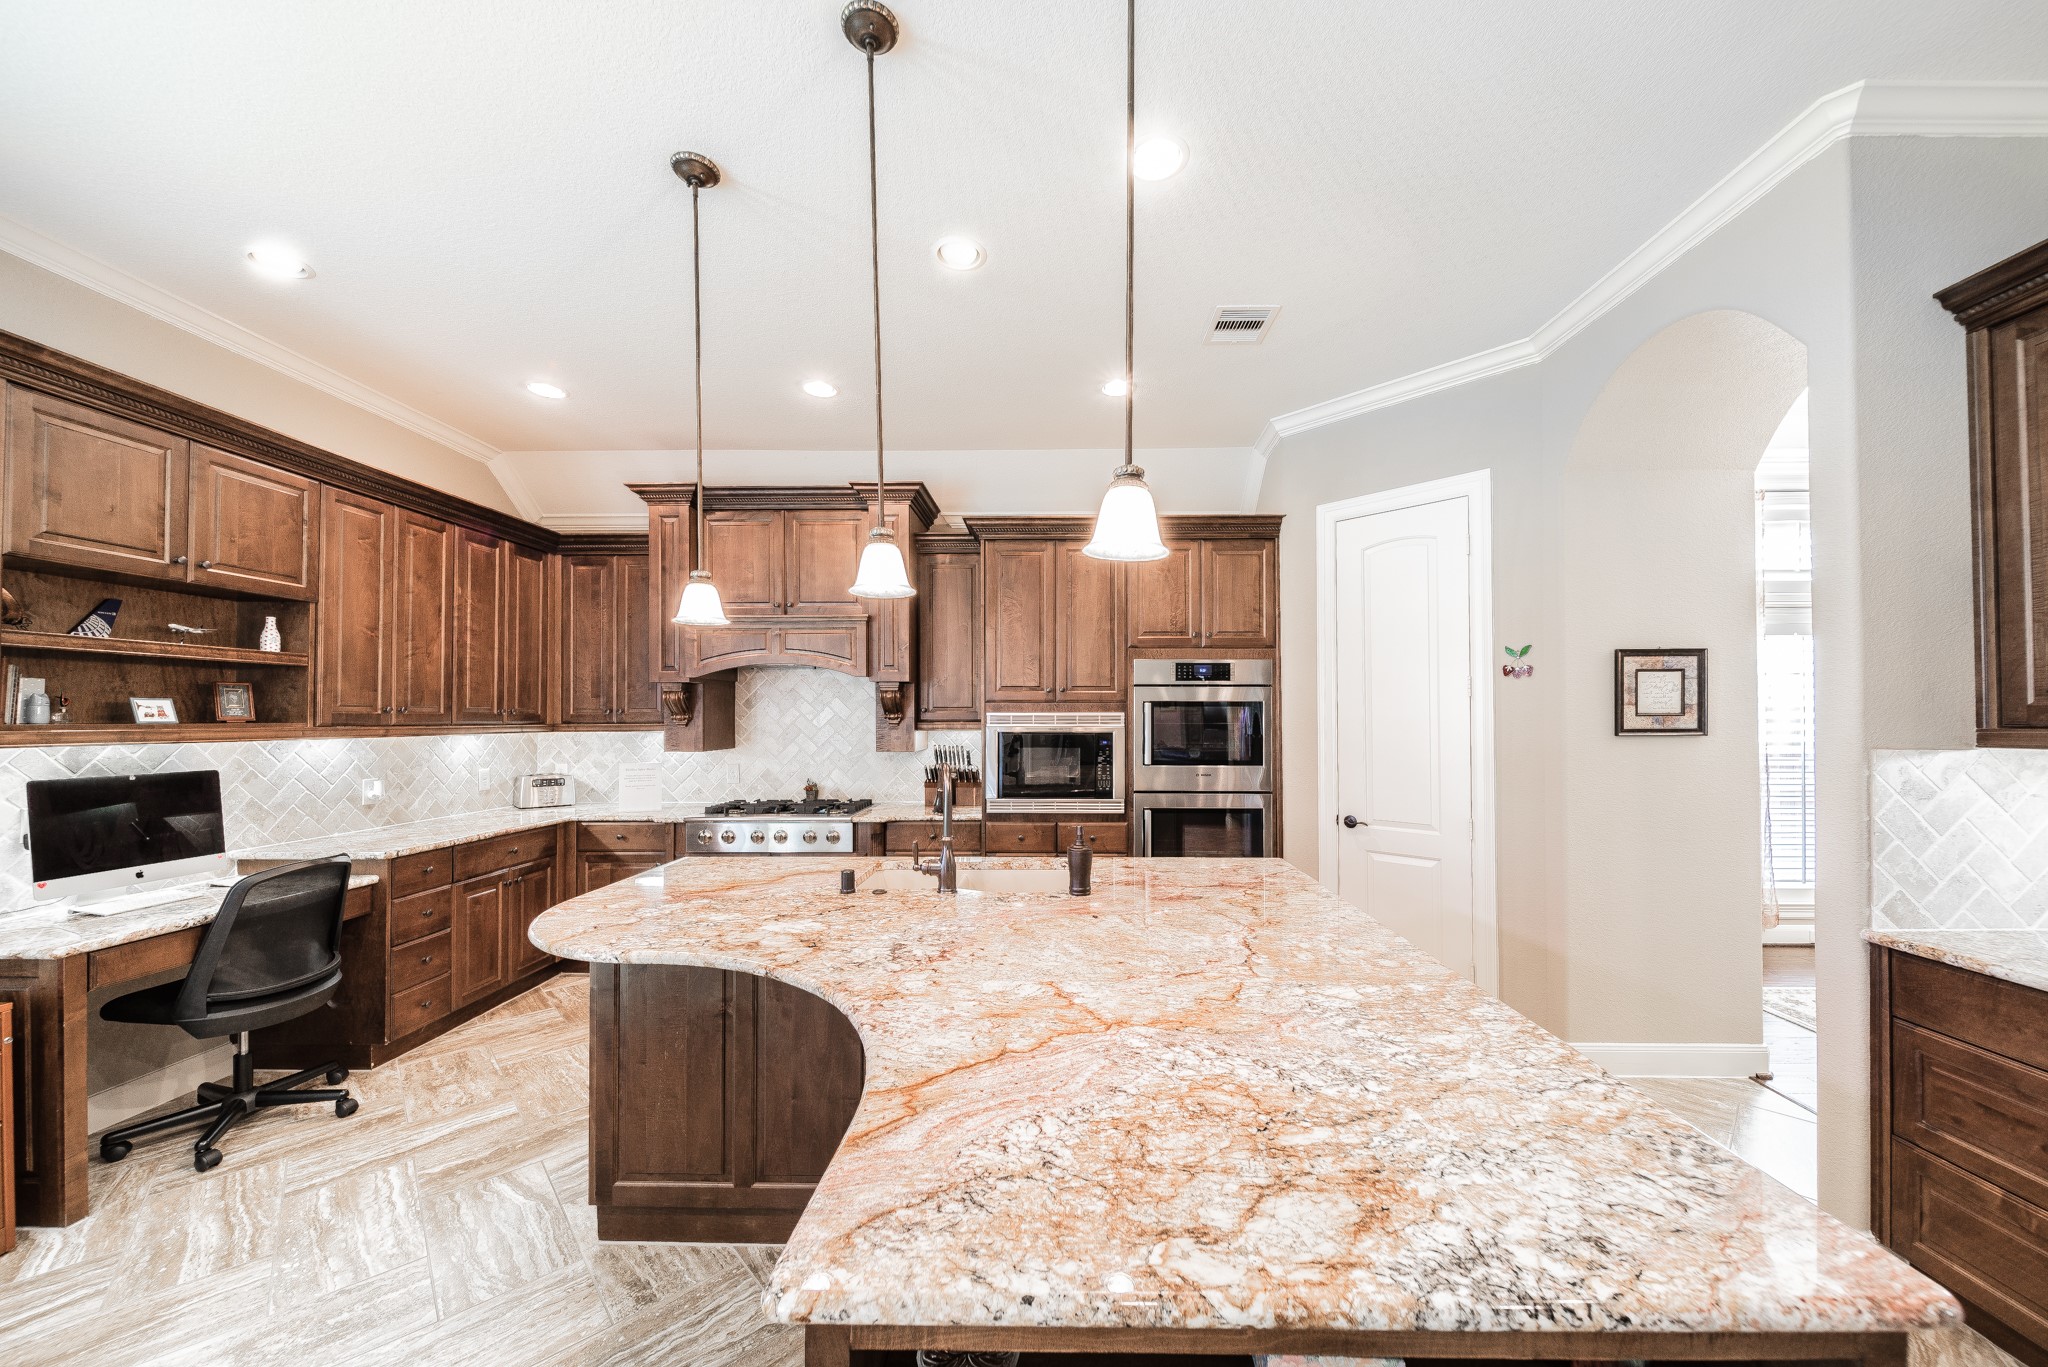 Large Island Kitchen Open to Family Room - If you have additional questions regarding 31278 Shady Arbor Lane  in Spring or would like to tour the property with us call 800-660-1022 and reference MLS# 42765152.